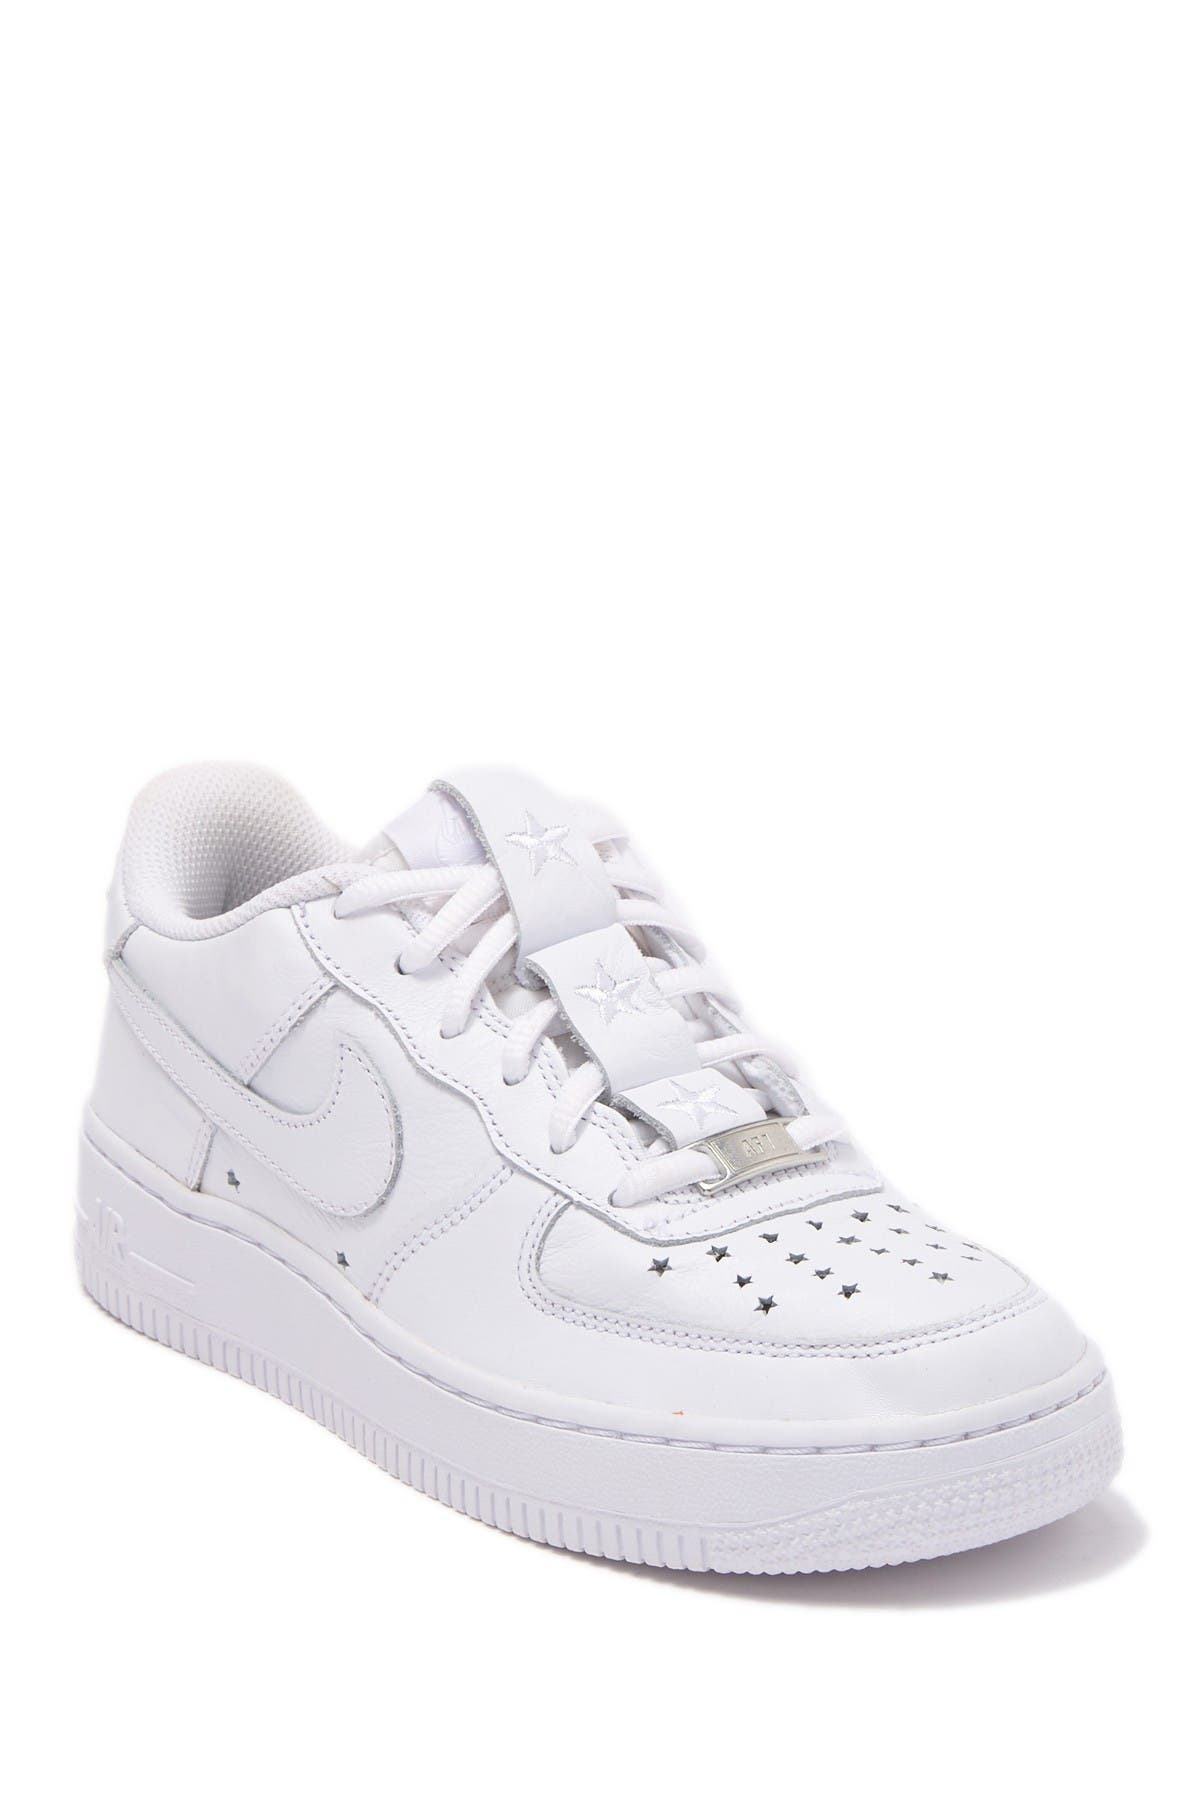 nordstrom air force ones